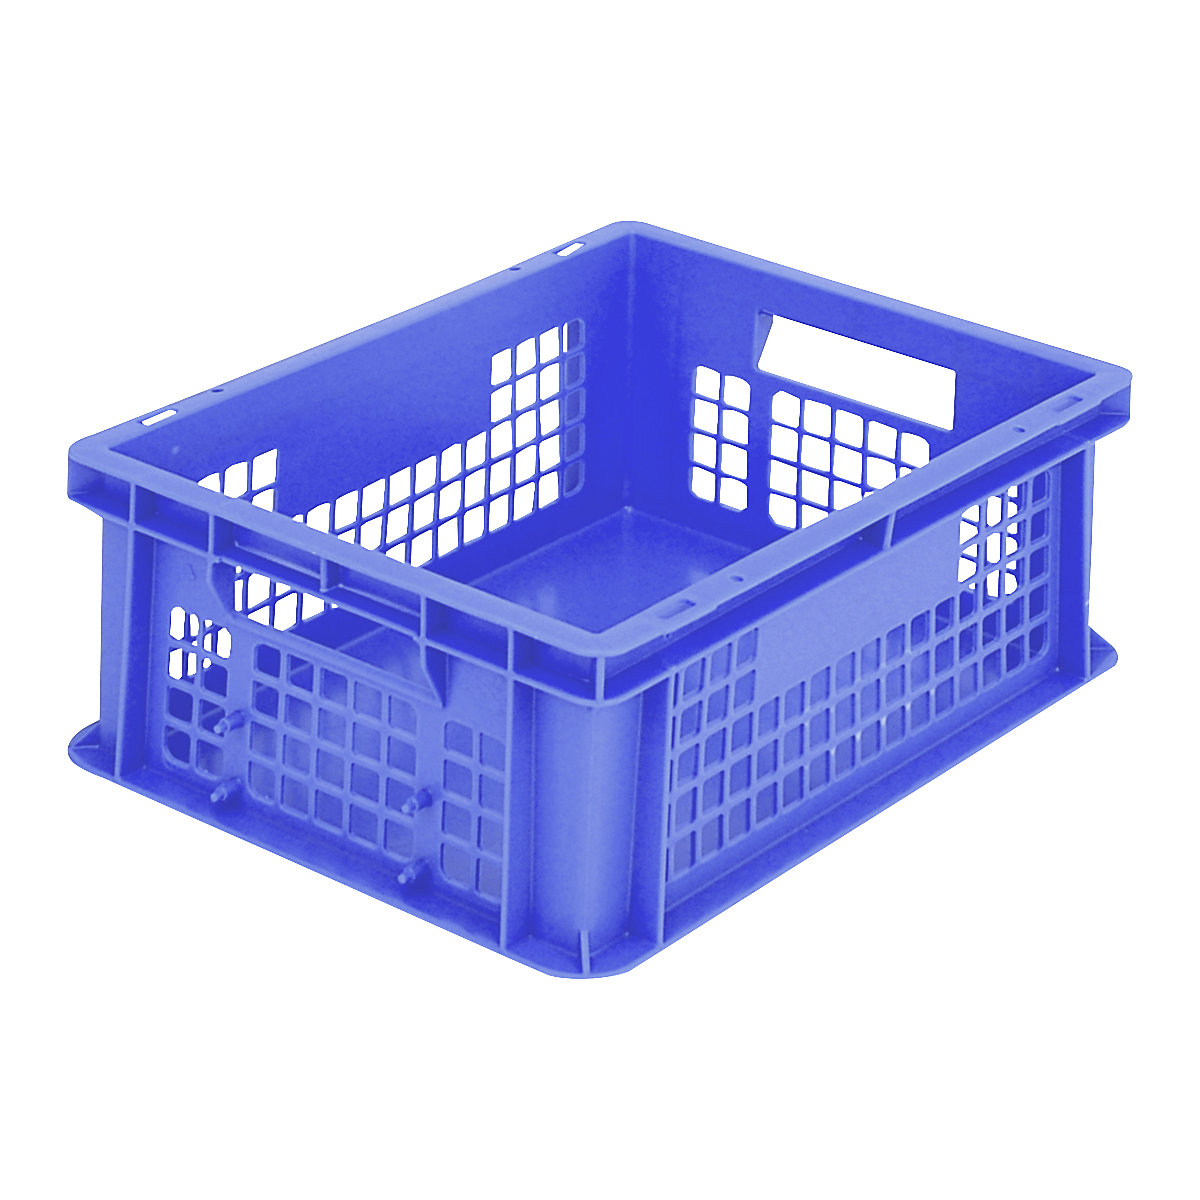 BN Euro stacking container – BITO